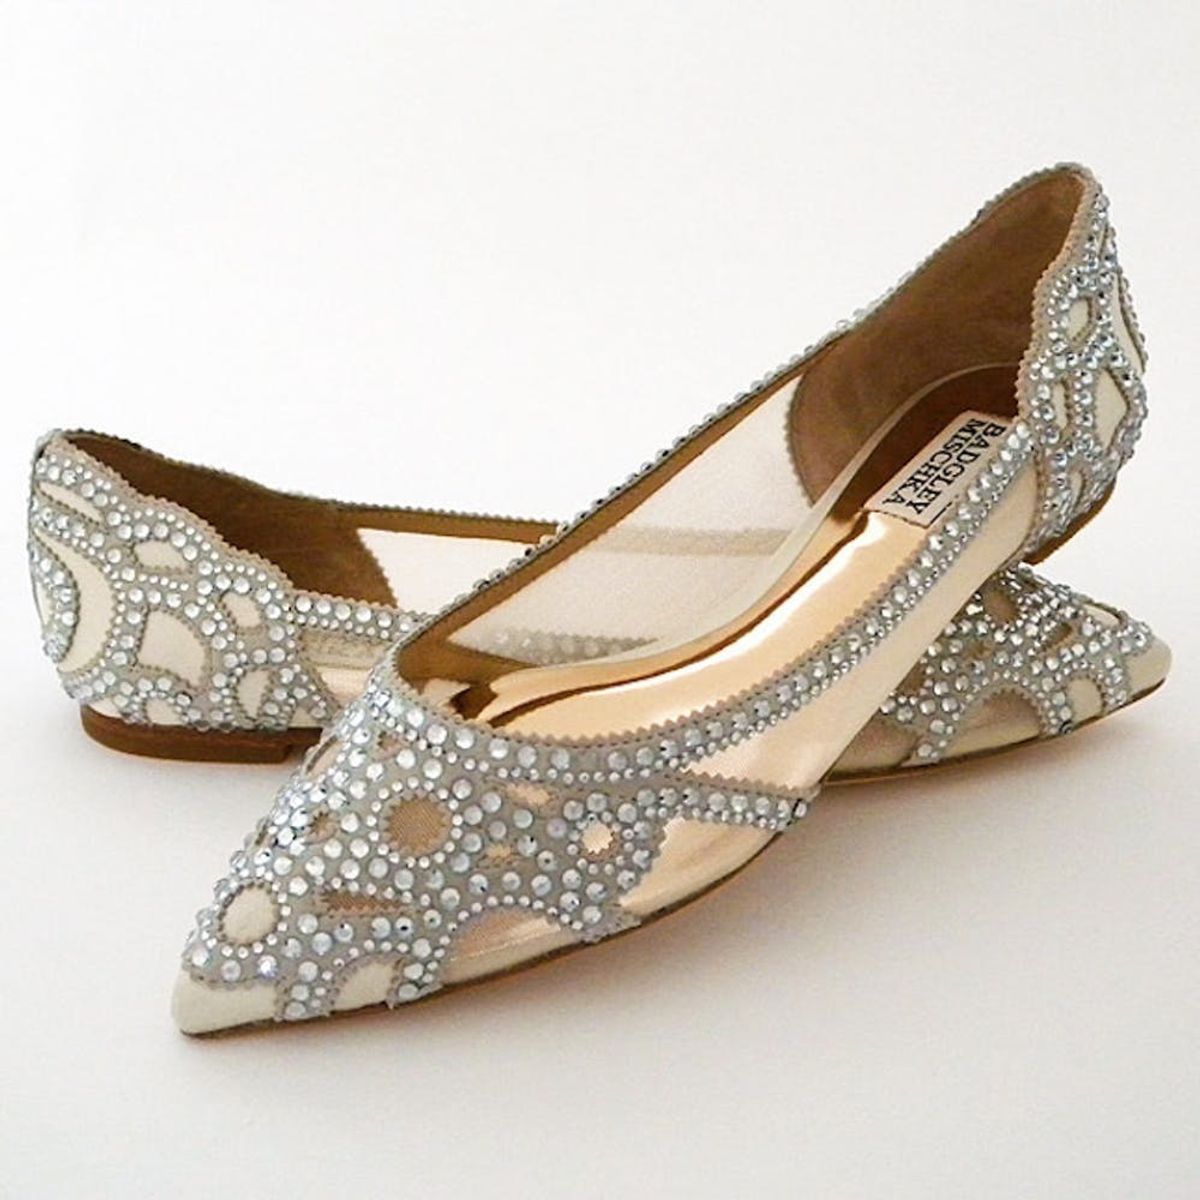 22 Pairs of Reception-Ready Wedding Flats So You Can Par-tay!